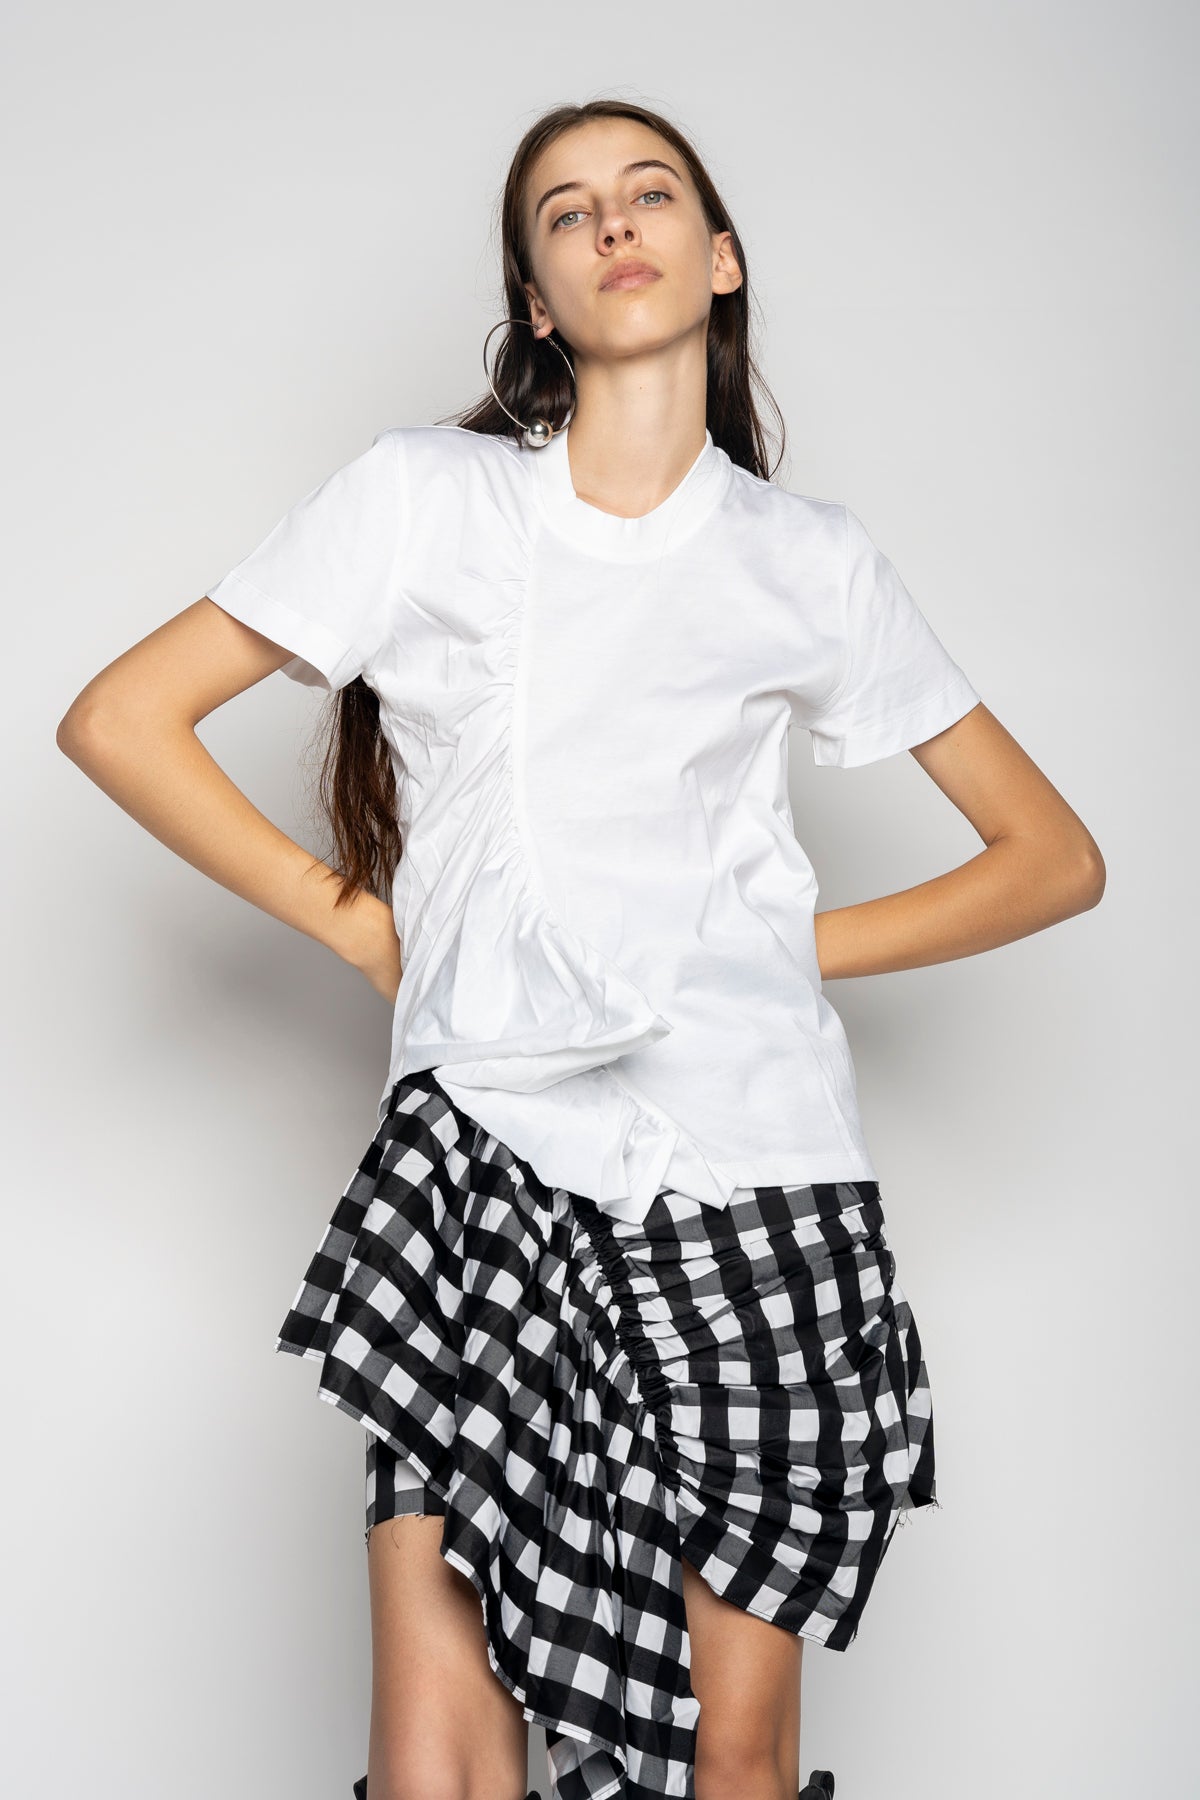 GATHERED T-SHIRT IN WHITE marques almeida